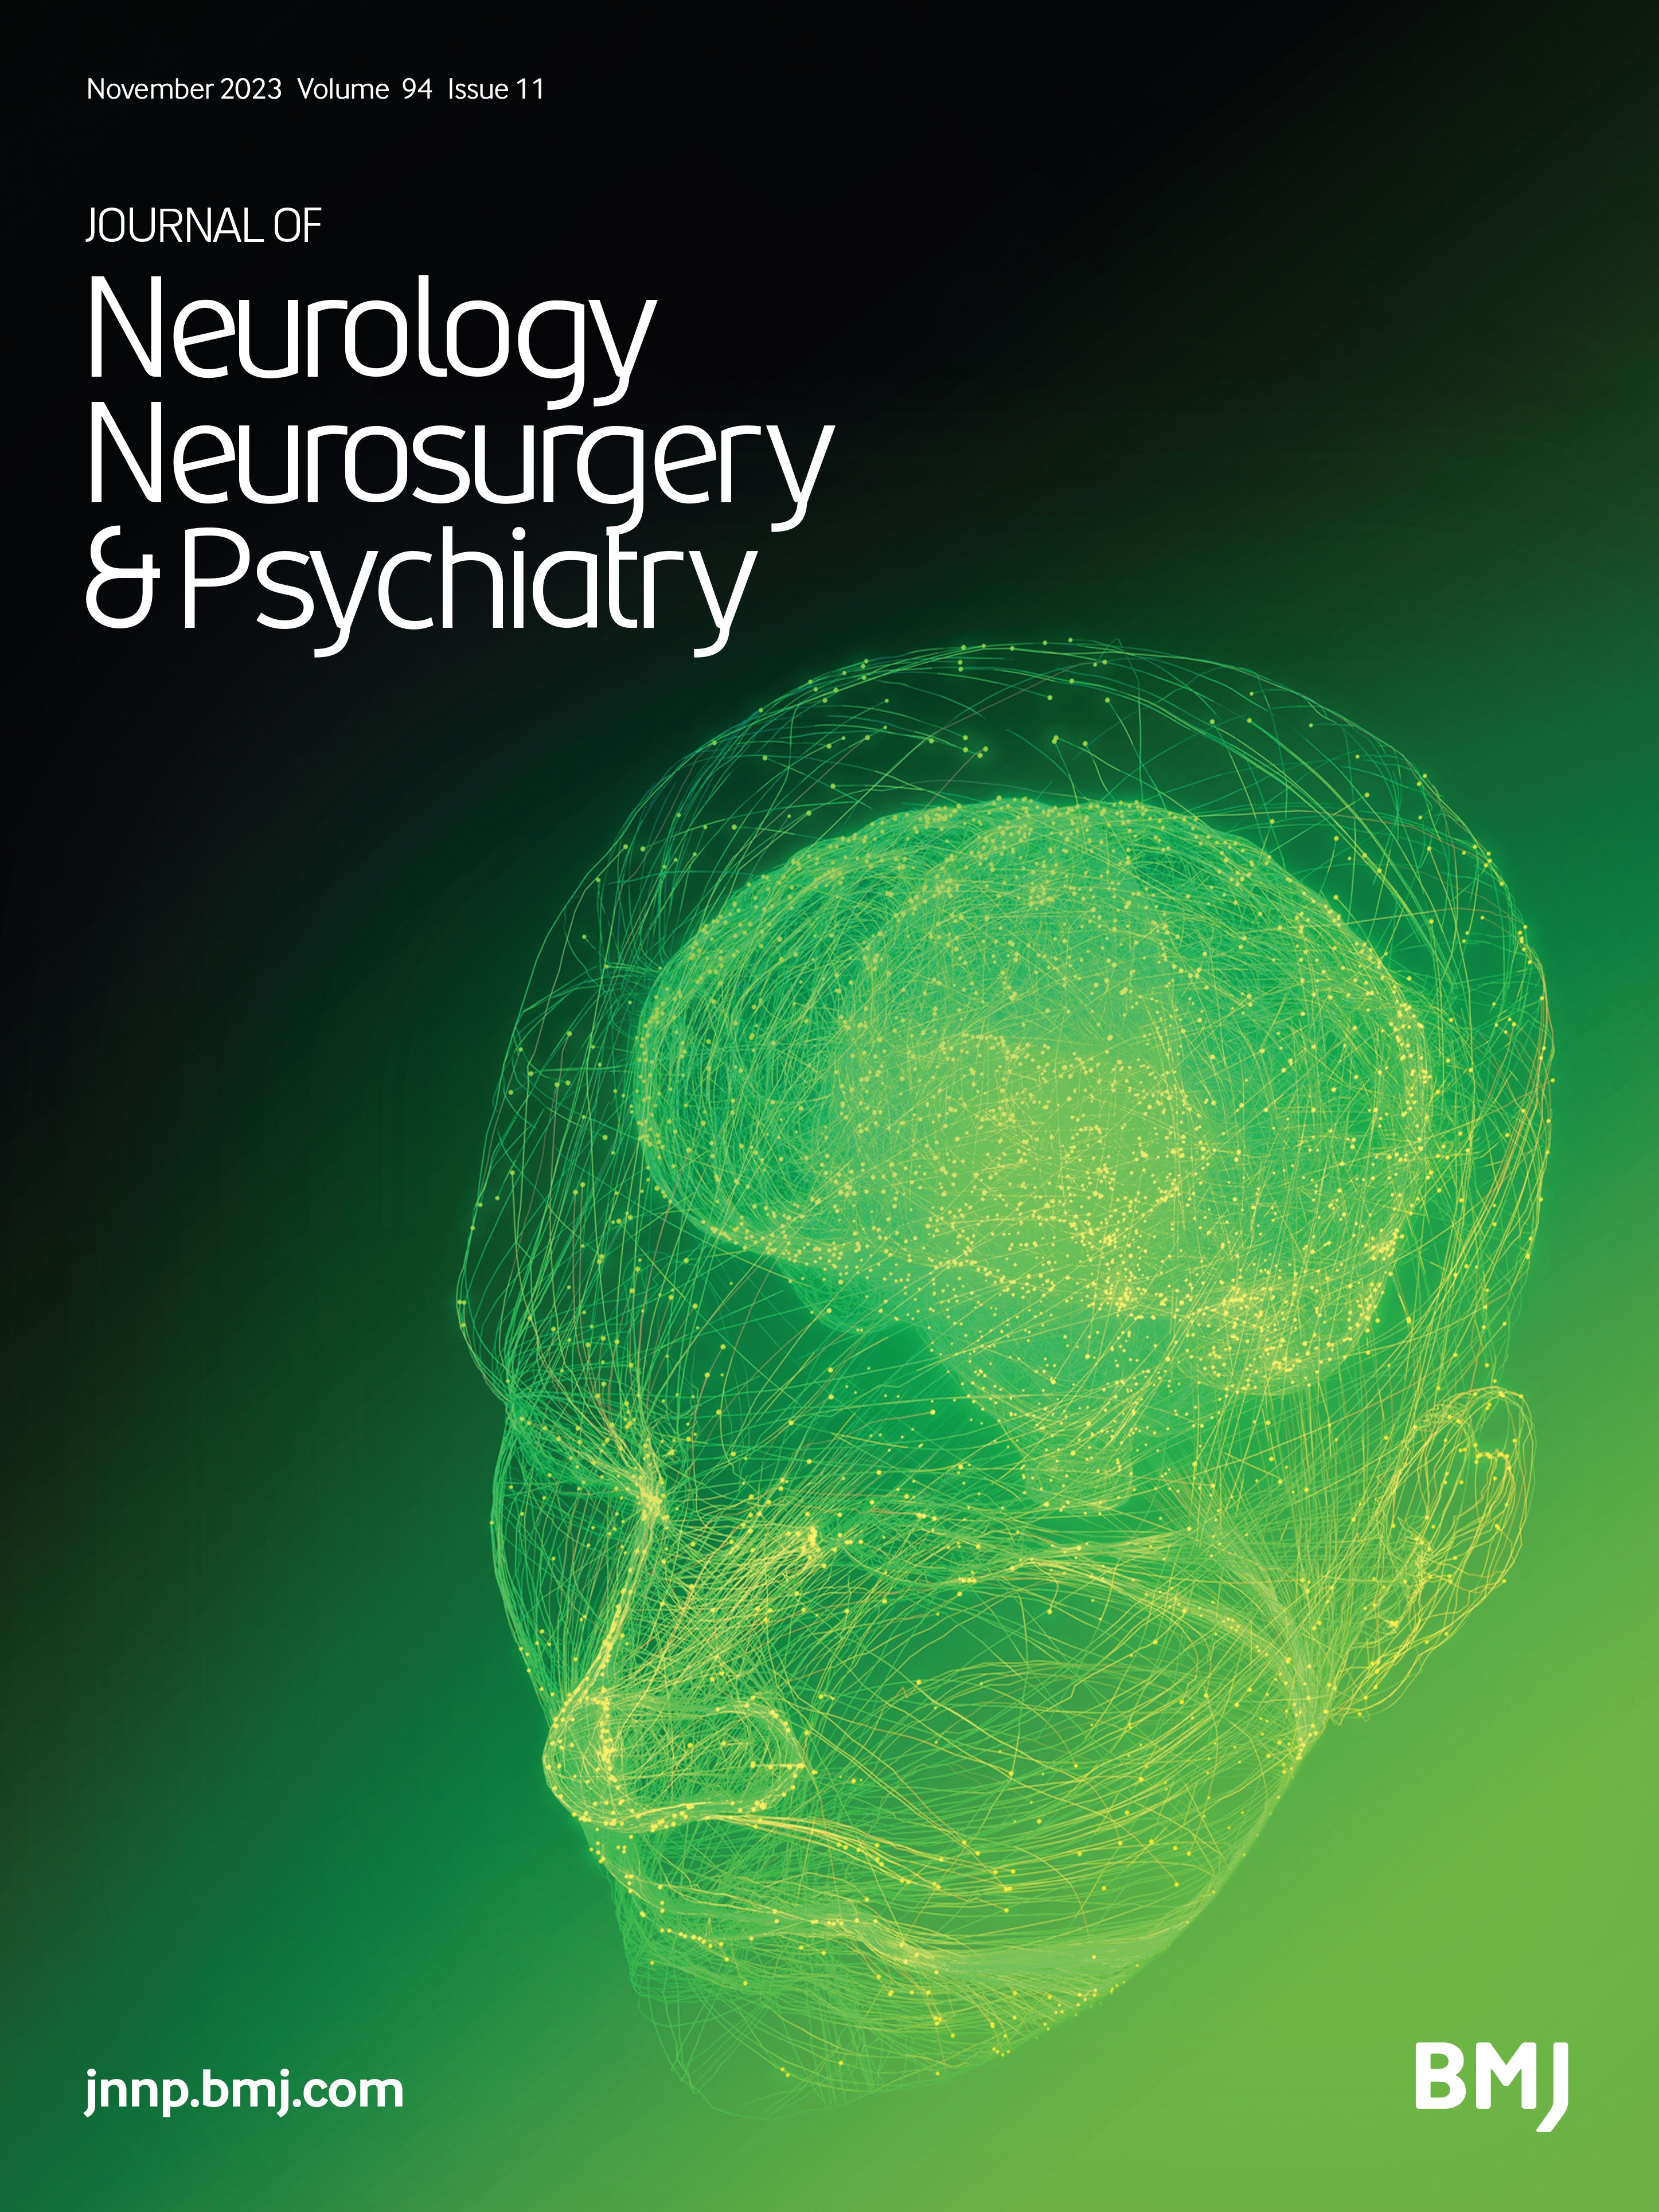 Familial {alpha}-synucleinopathy spectrum features in patients with psychiatric REM sleep behaviour disorder